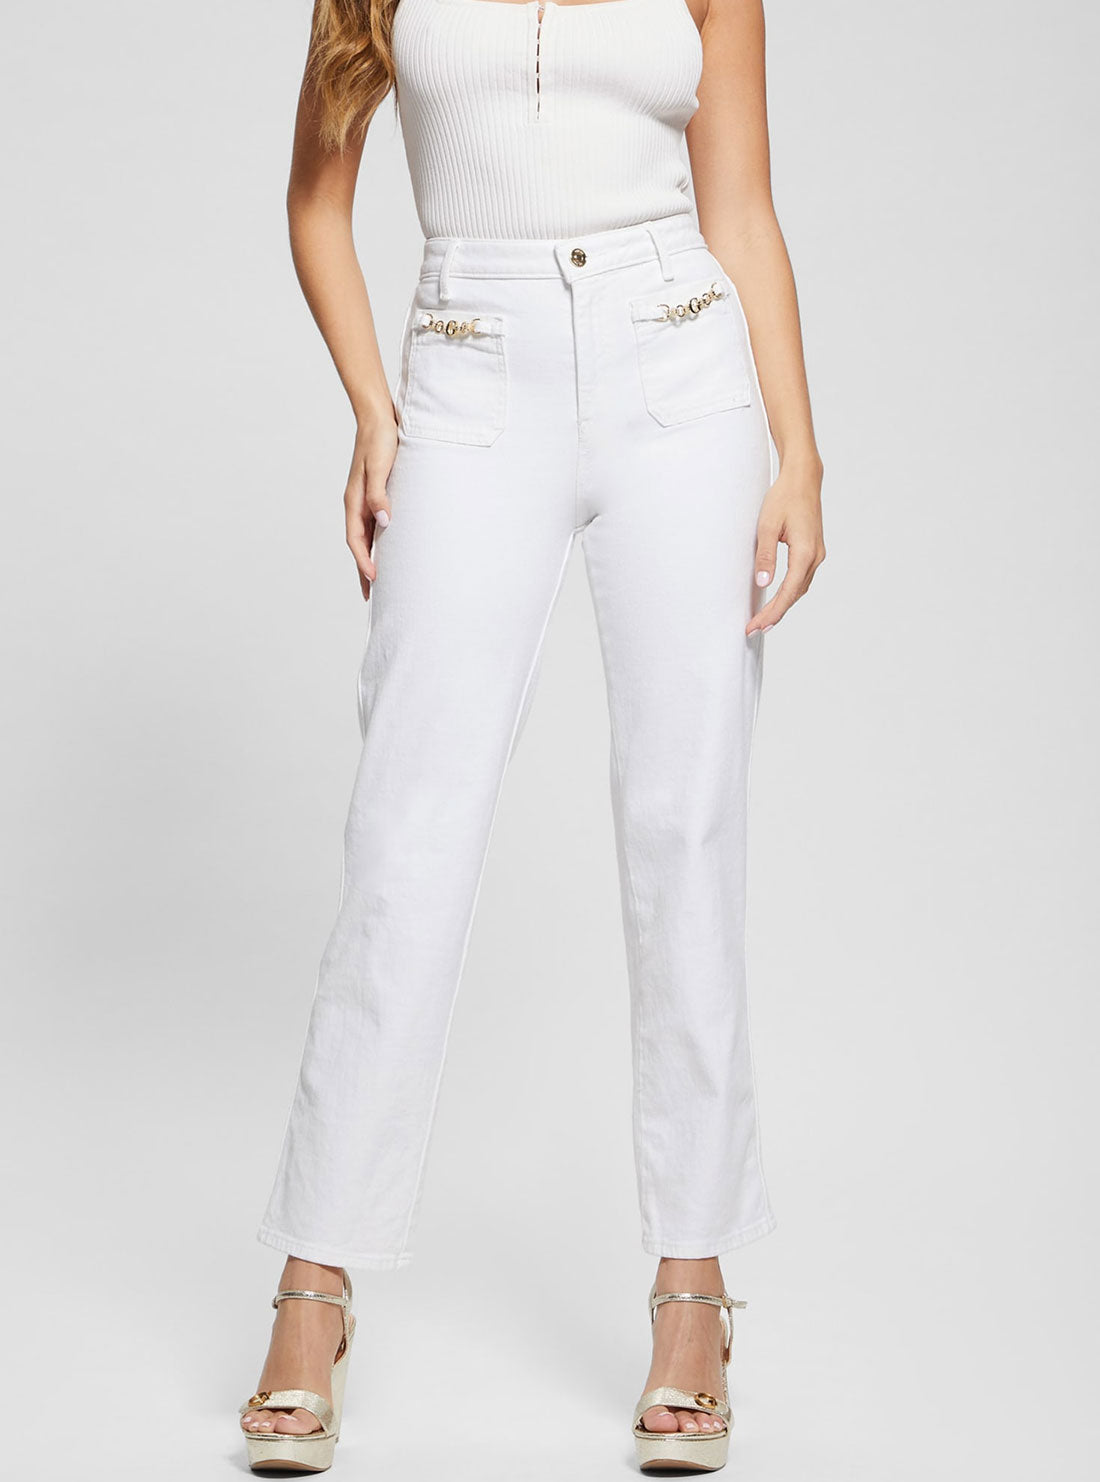 GUESS High-Rise Straight Leg Relaxed Jeans in White Wash front view